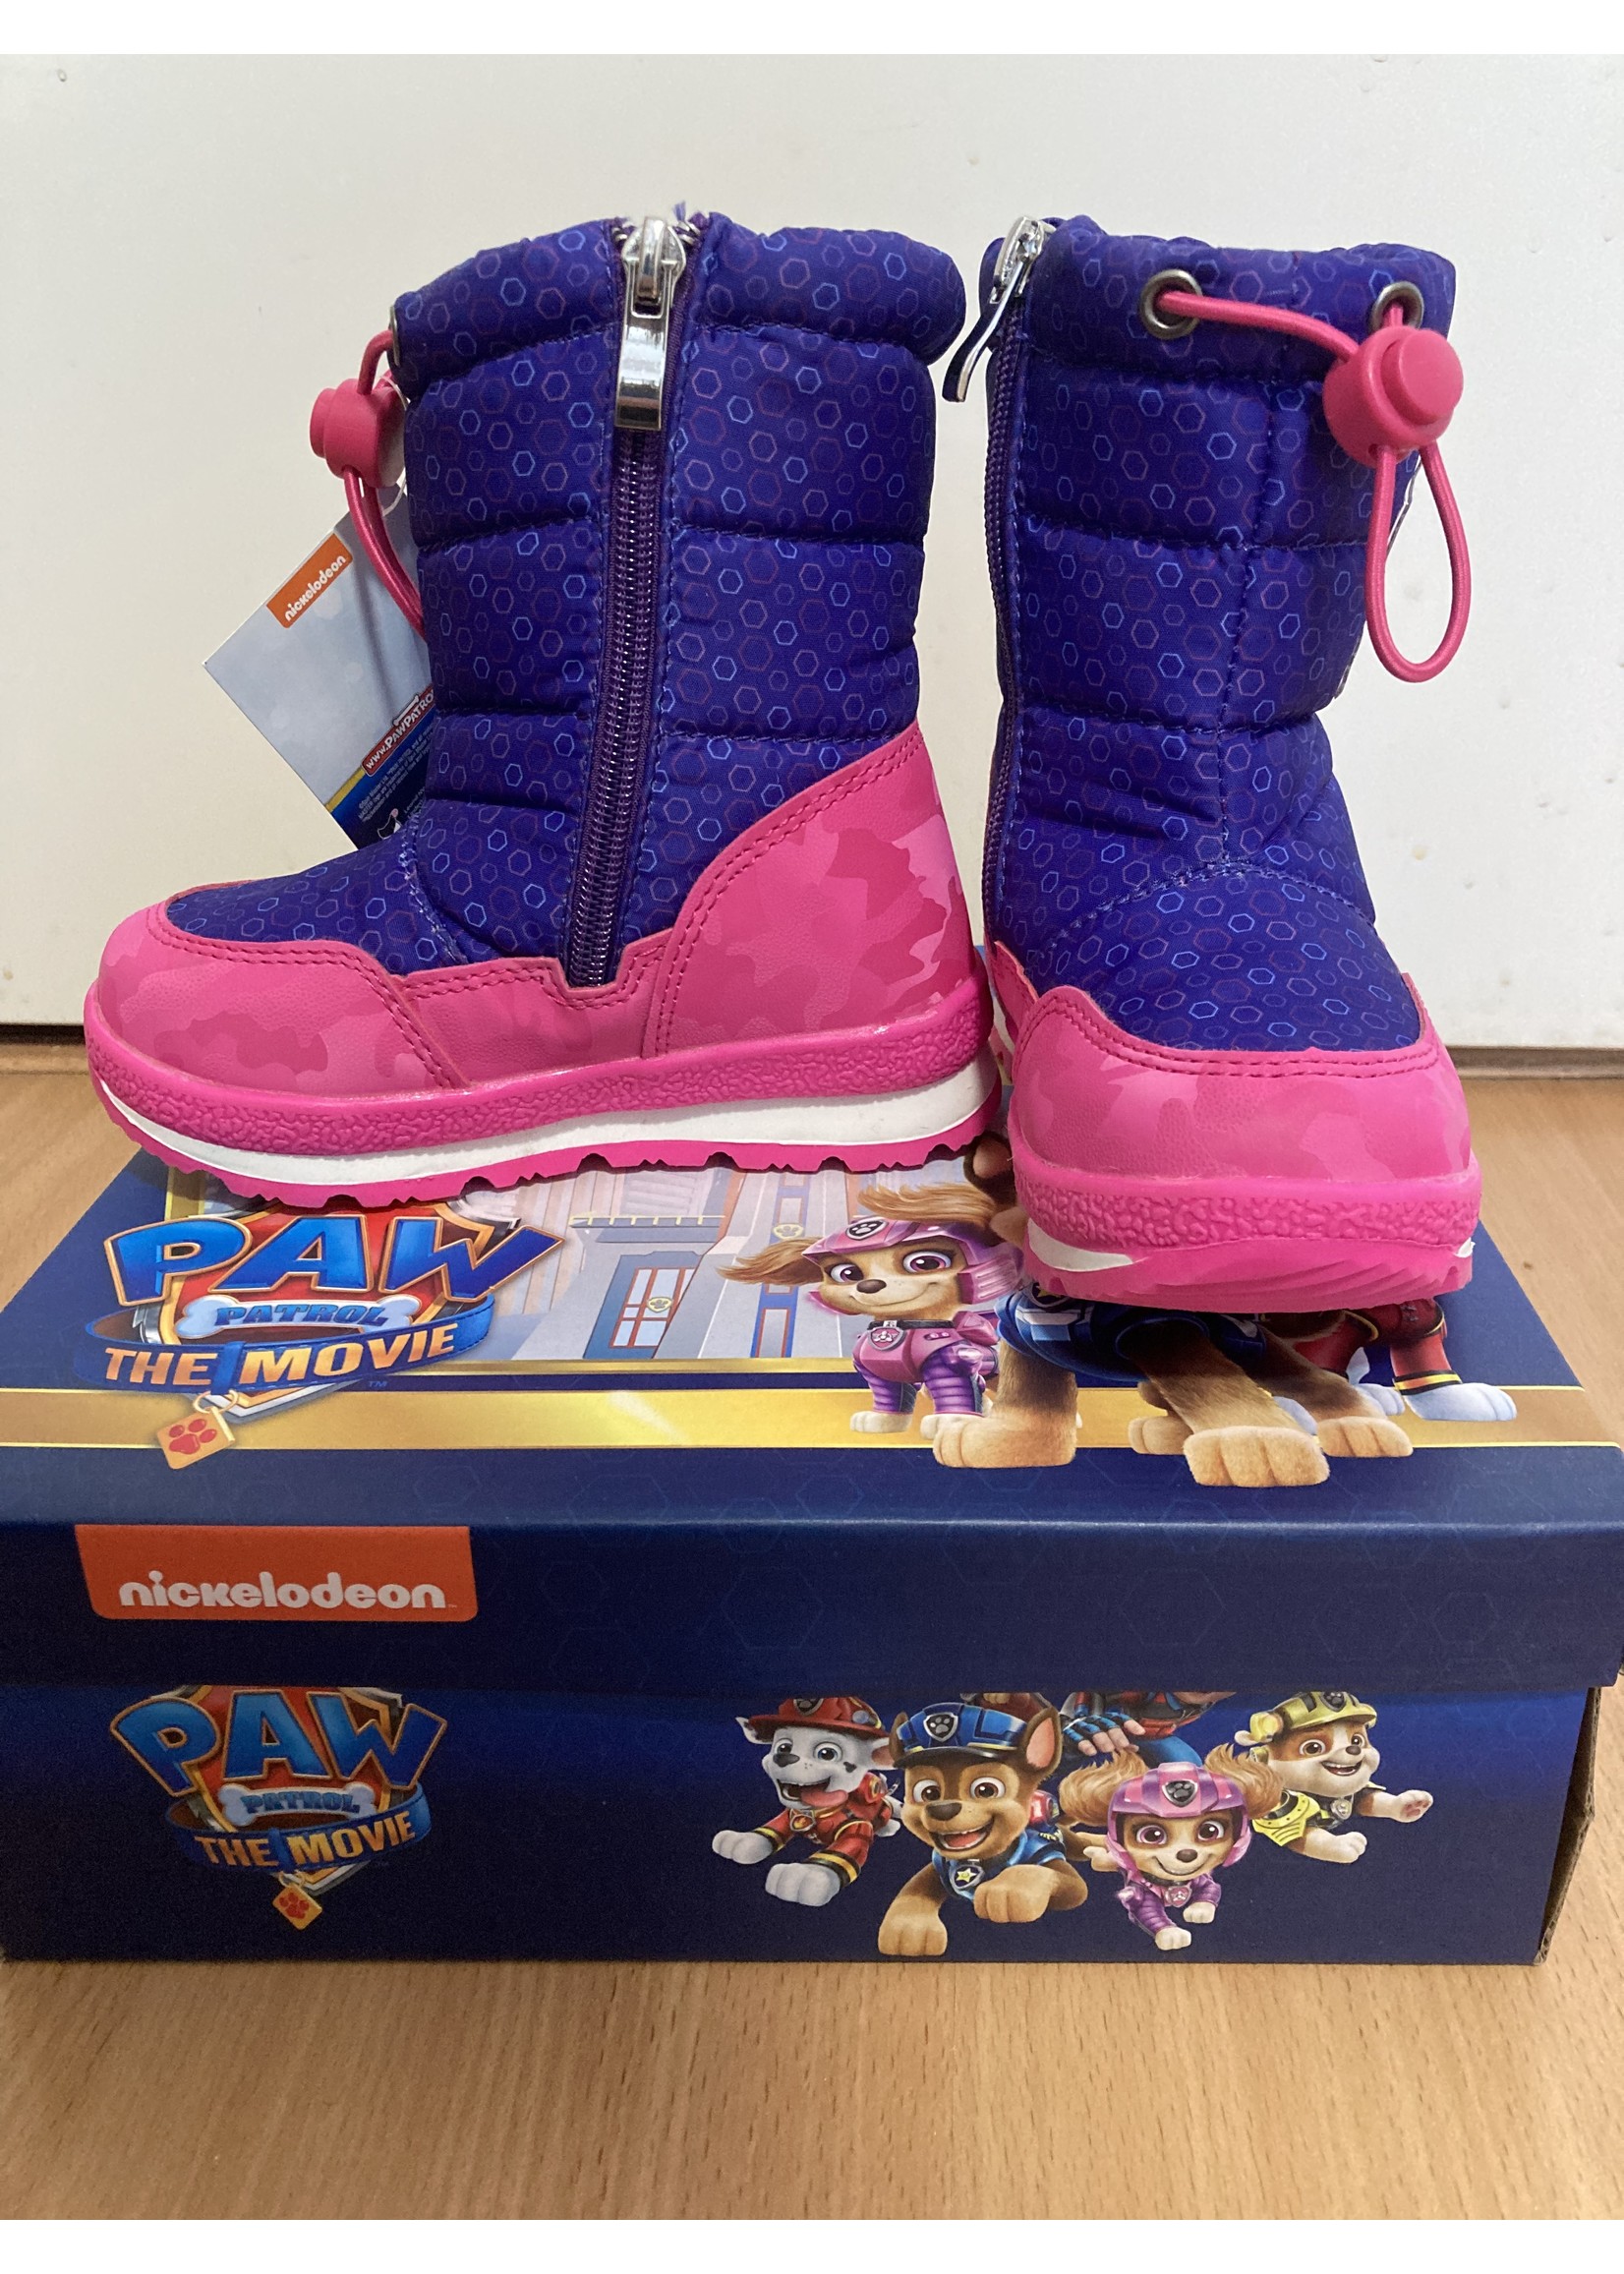 Nickelodeon Paw Patrol snow boots from Nickelodeon pink